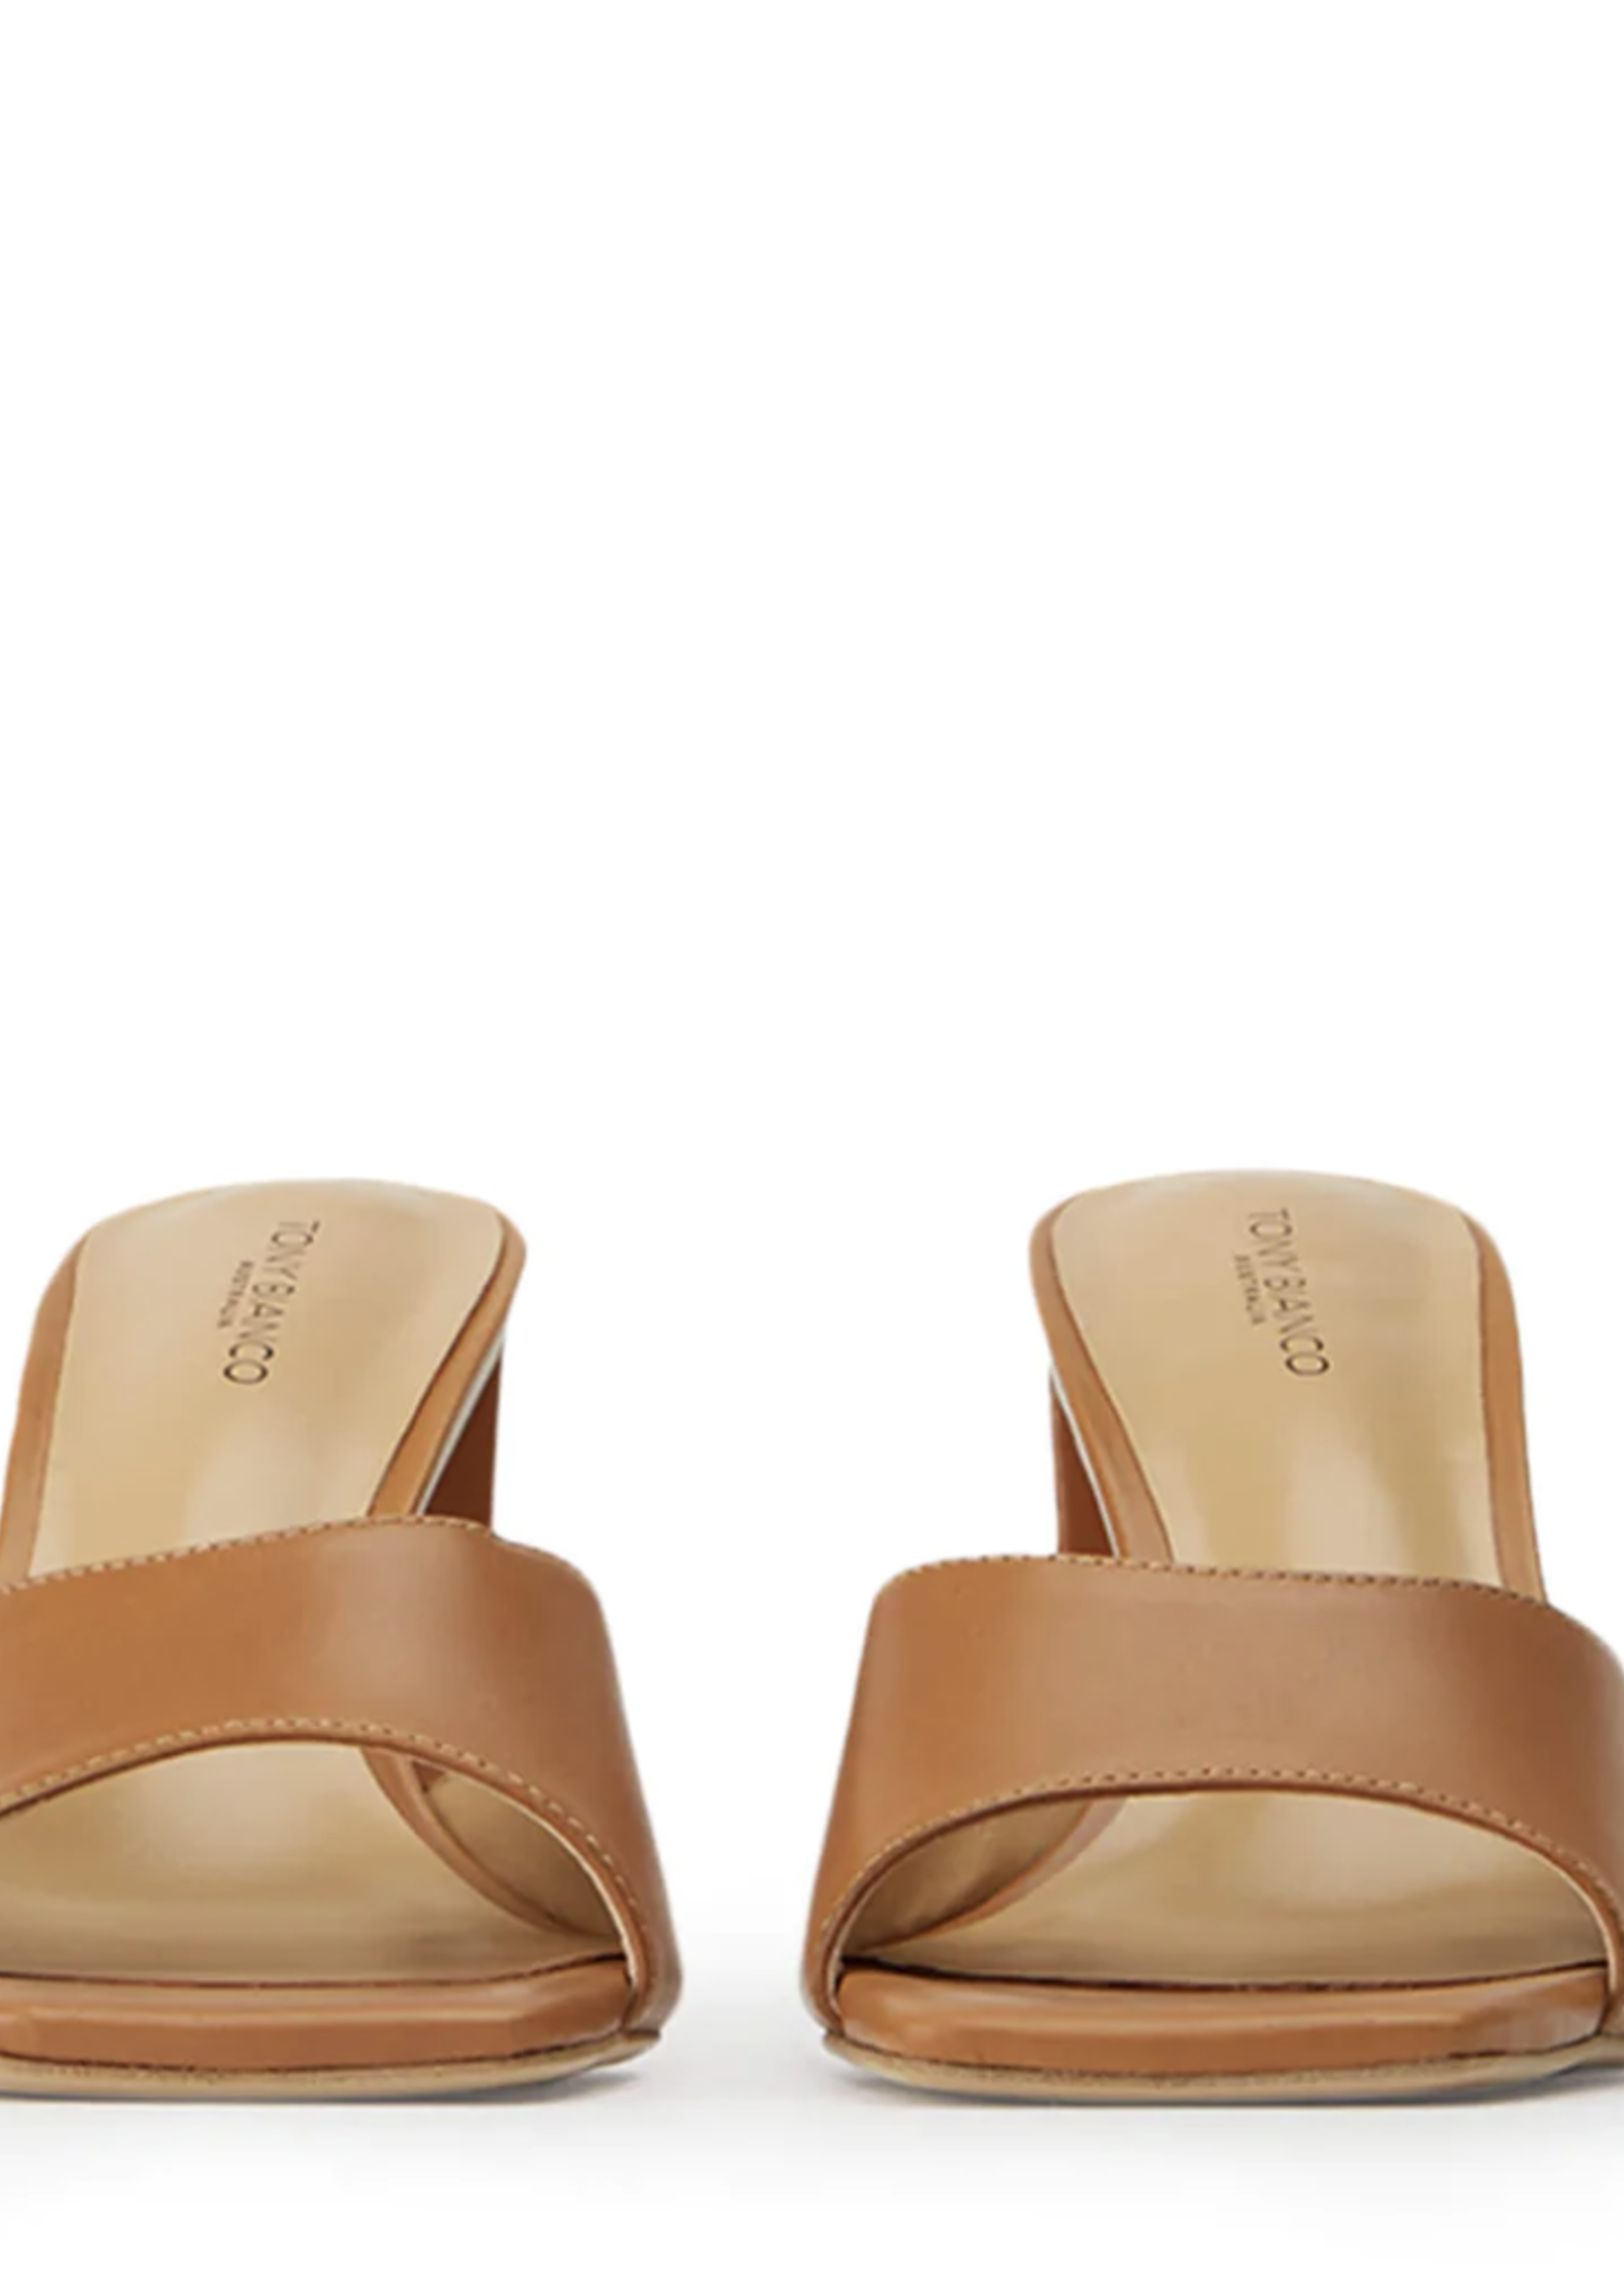 Elitaire Boutique The Cyrus in Tan